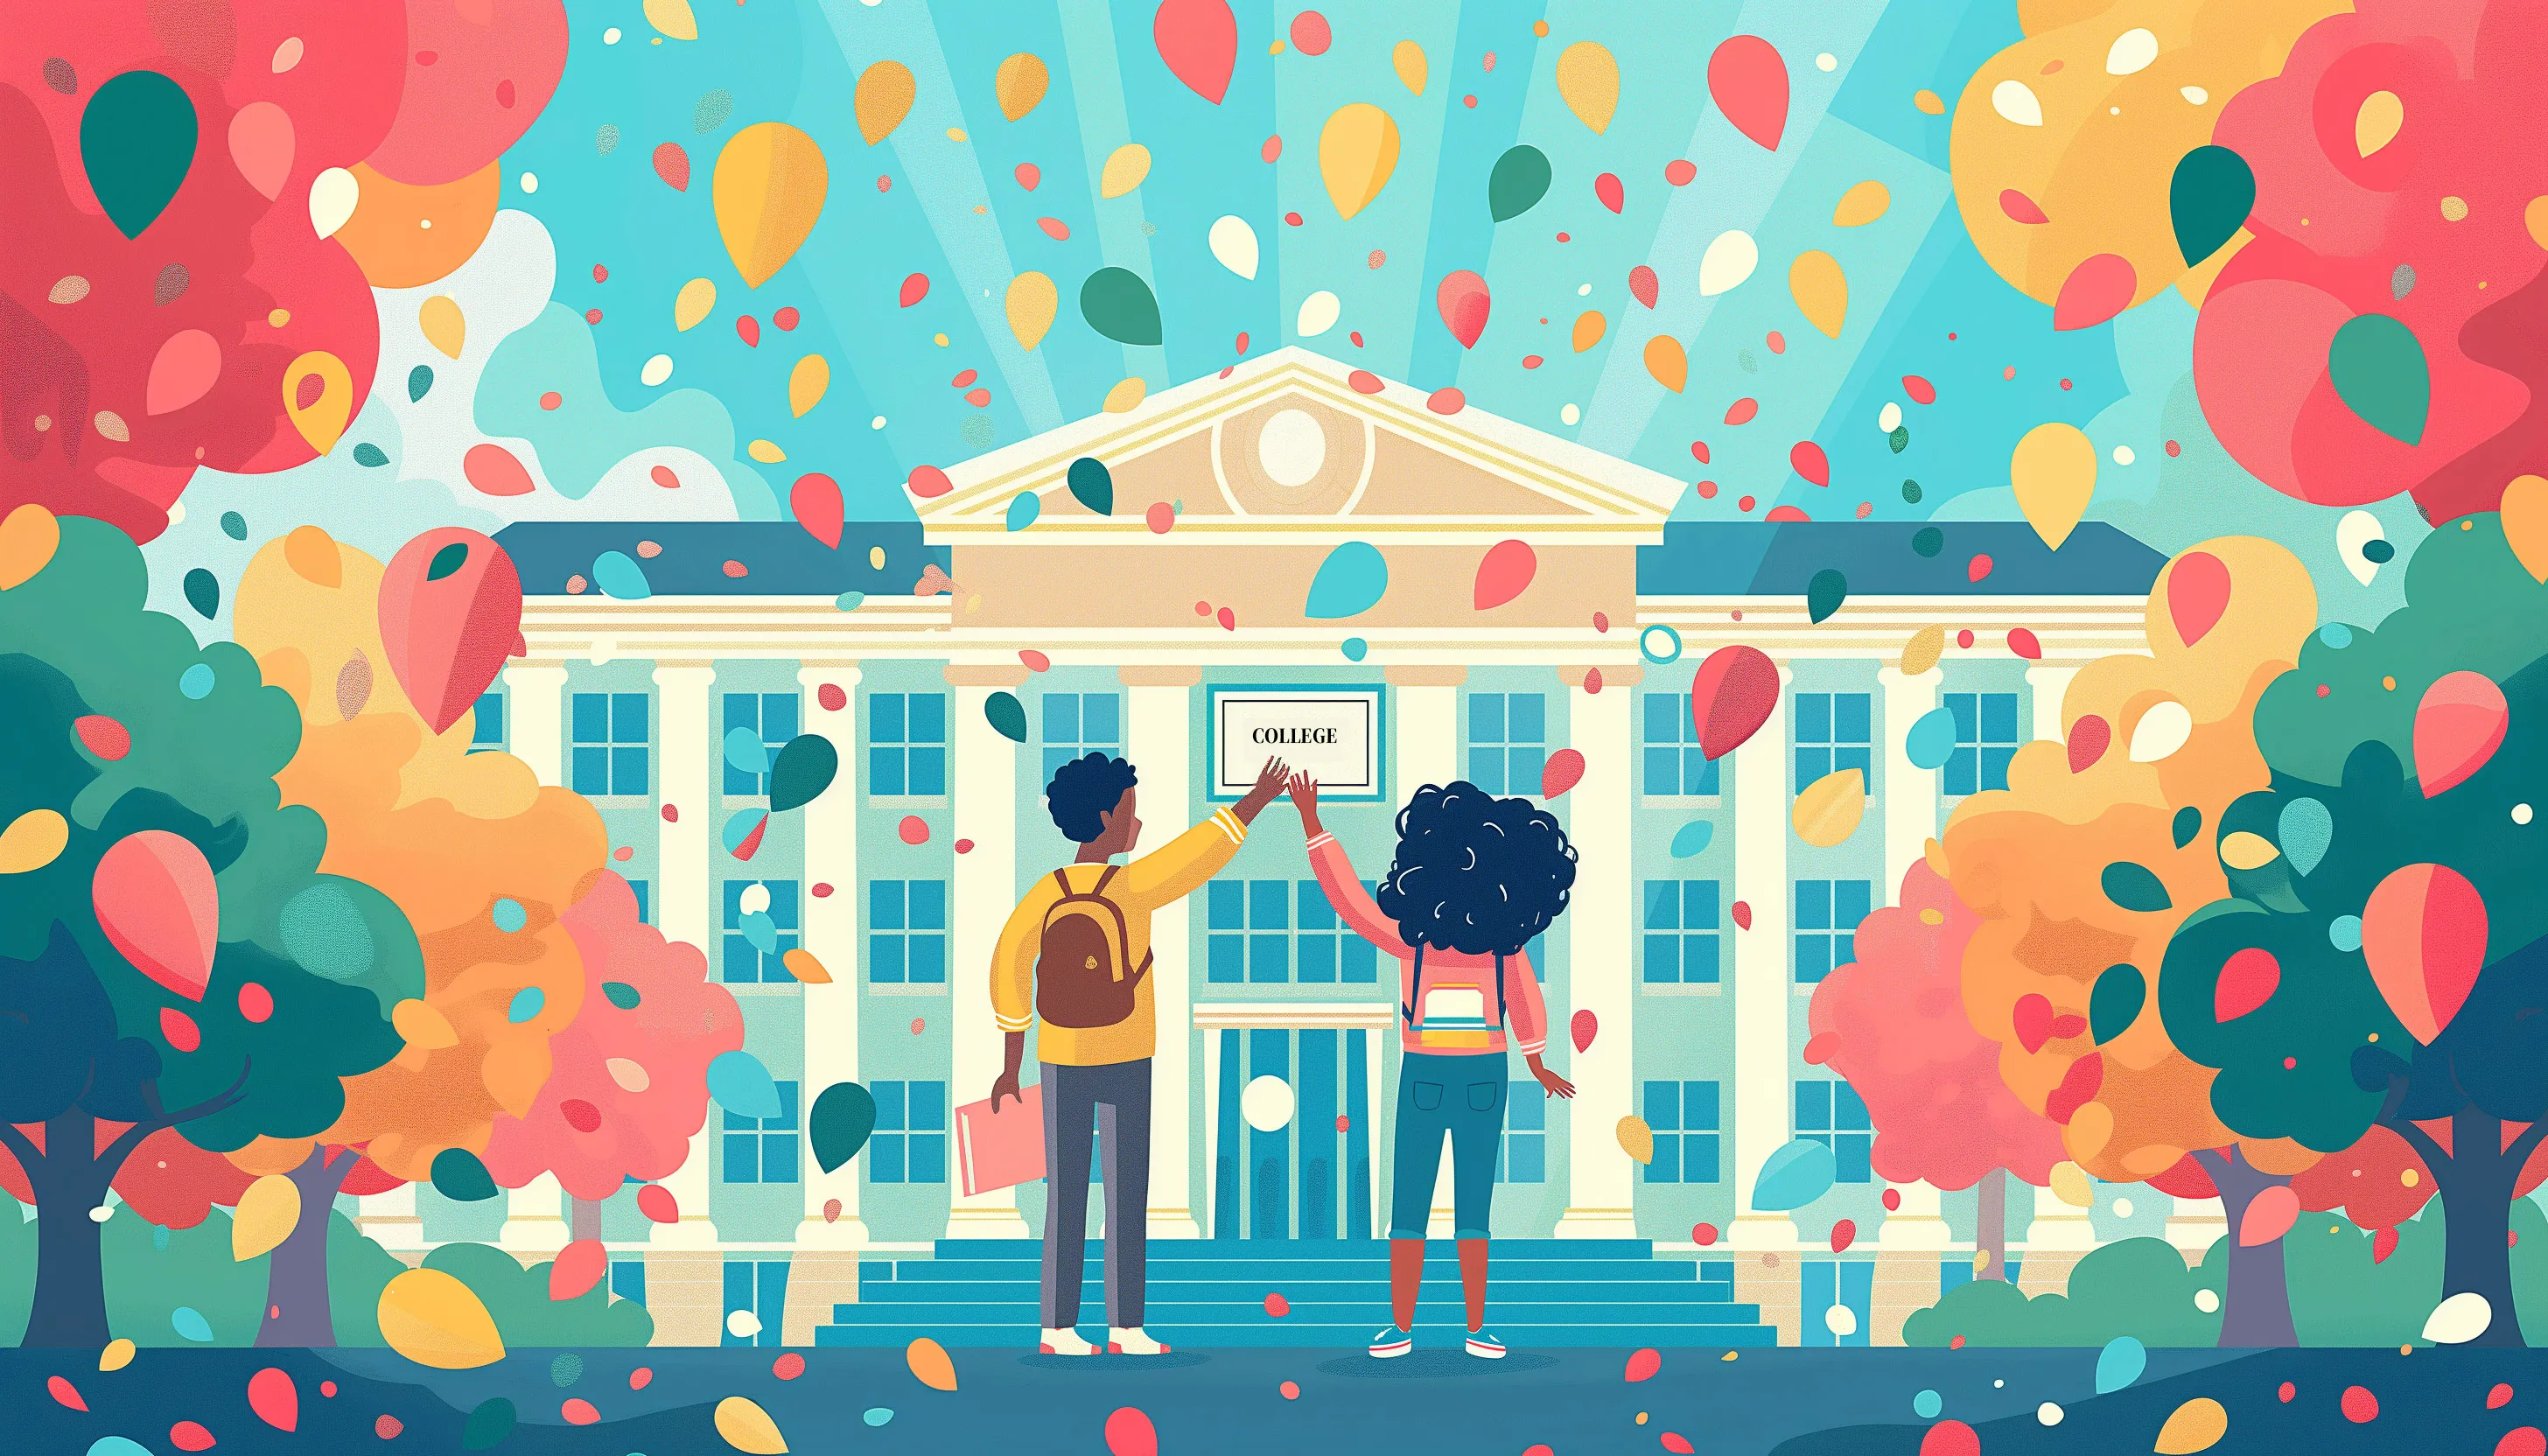 Illustration of two college students standing in front of a college building